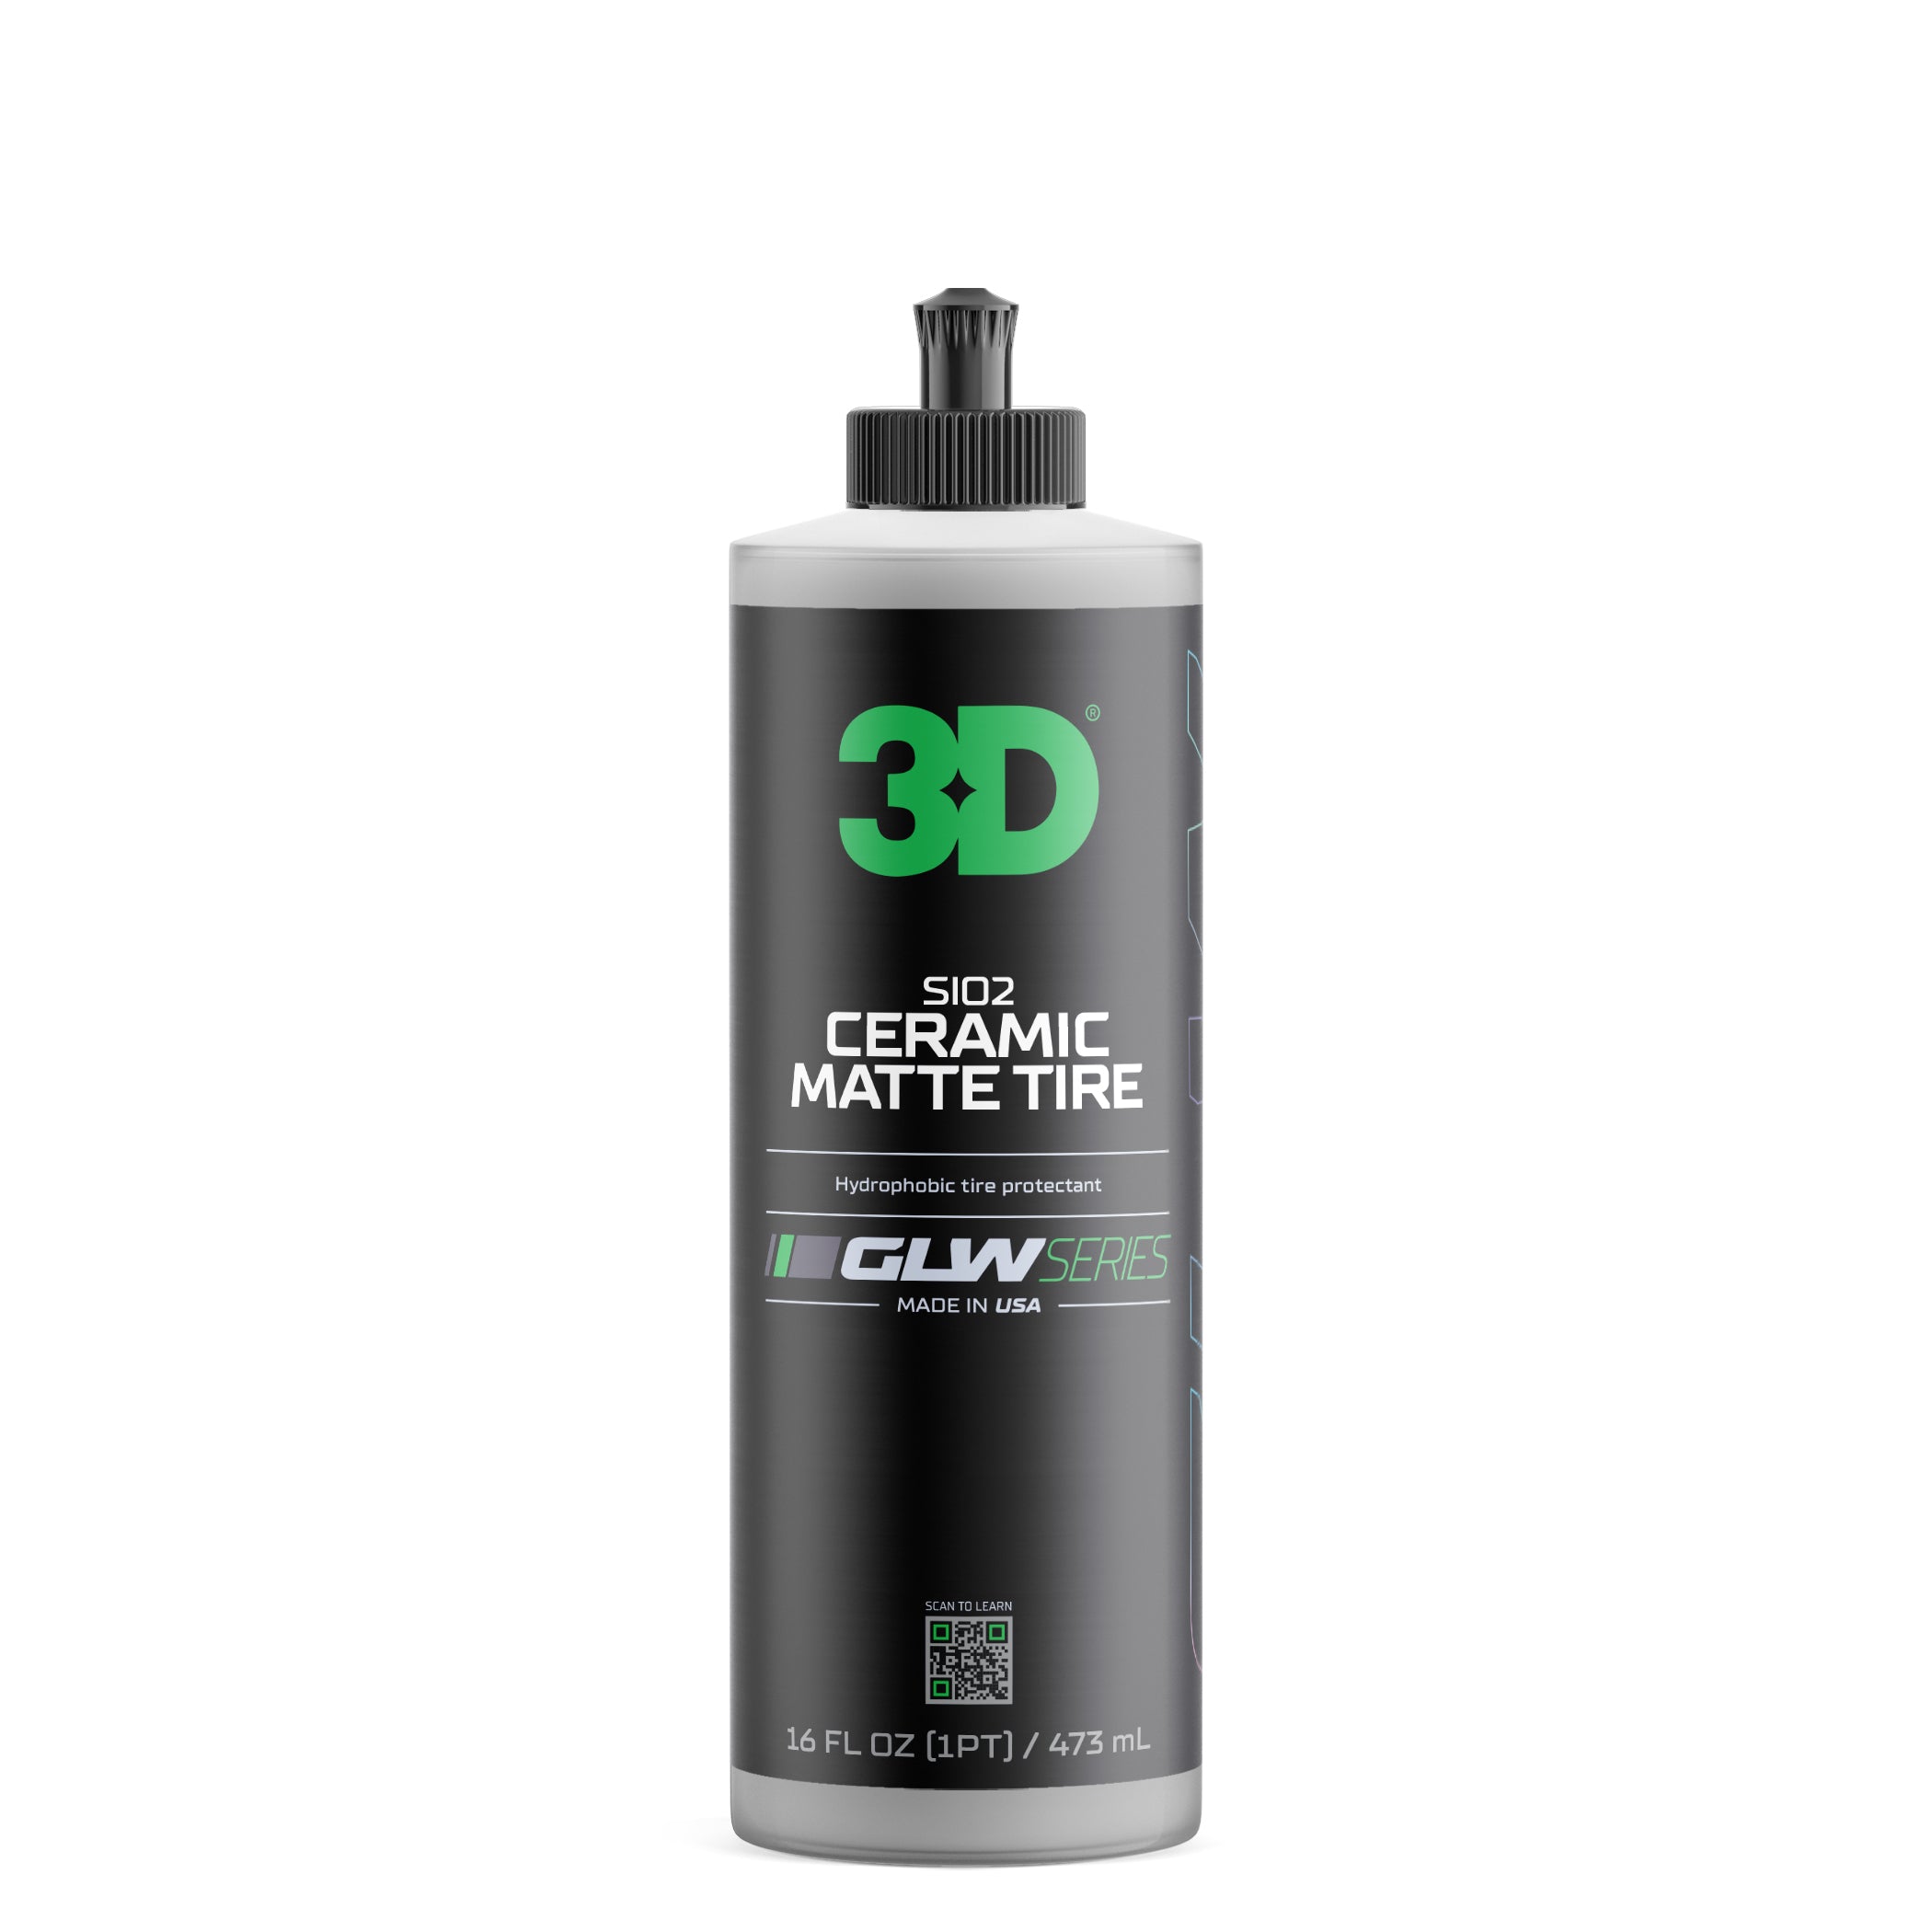 3D GLW Series Iron Remover 16oz | Iron Oxide and Brake Dust Remover